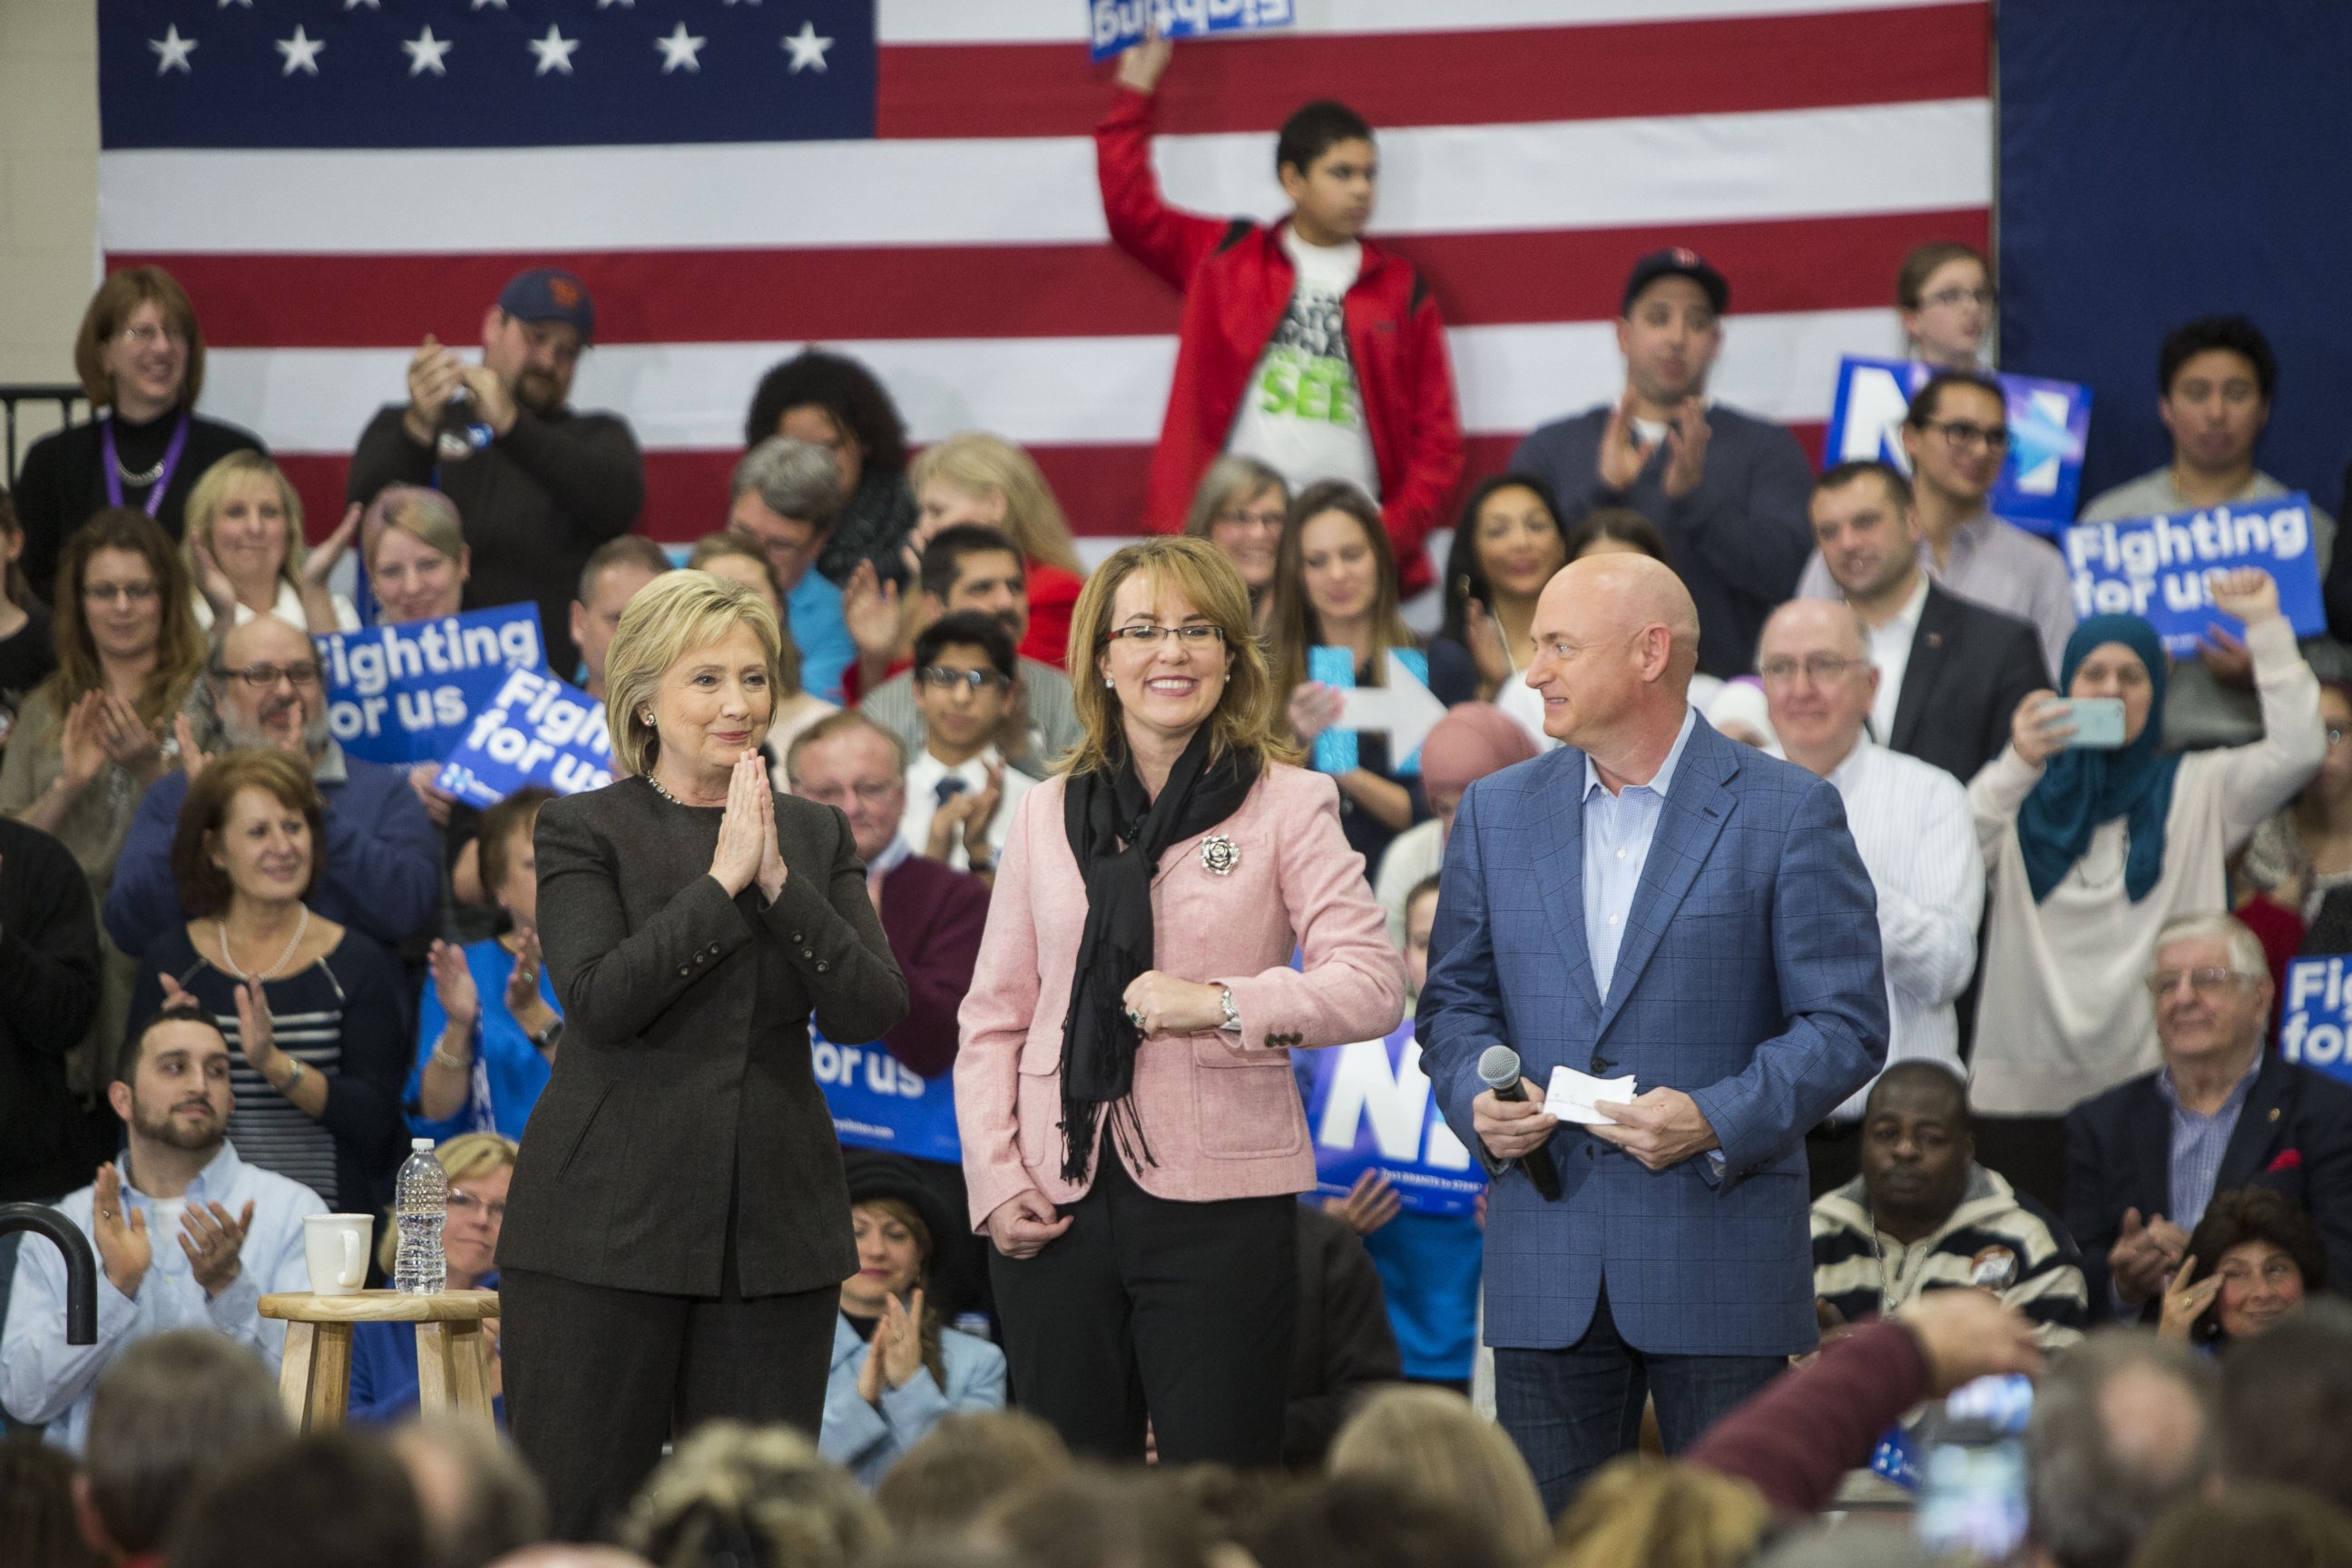 PHOTO: Hillary Clinton, Democratic presidential candidate, stands on stage with Gabrielle Giffords, former U.S. Representative from Arizona, center, and her husband astronaut Mark Kelly during a campaign event in Manchester, N.H., Feb. 3, 2016.